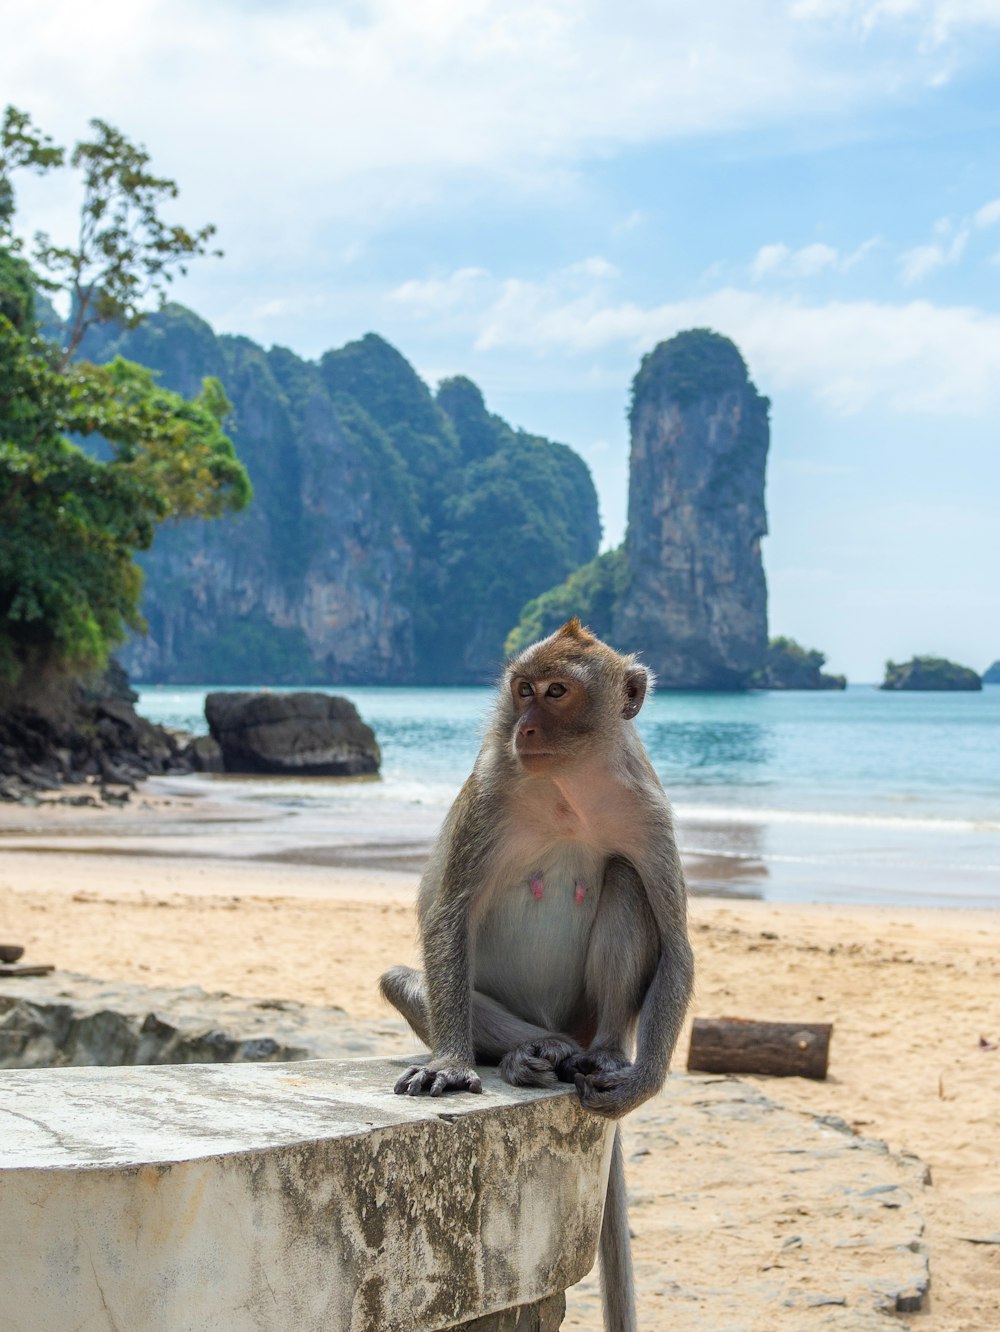 a monkey is sitting on a rock at the beach